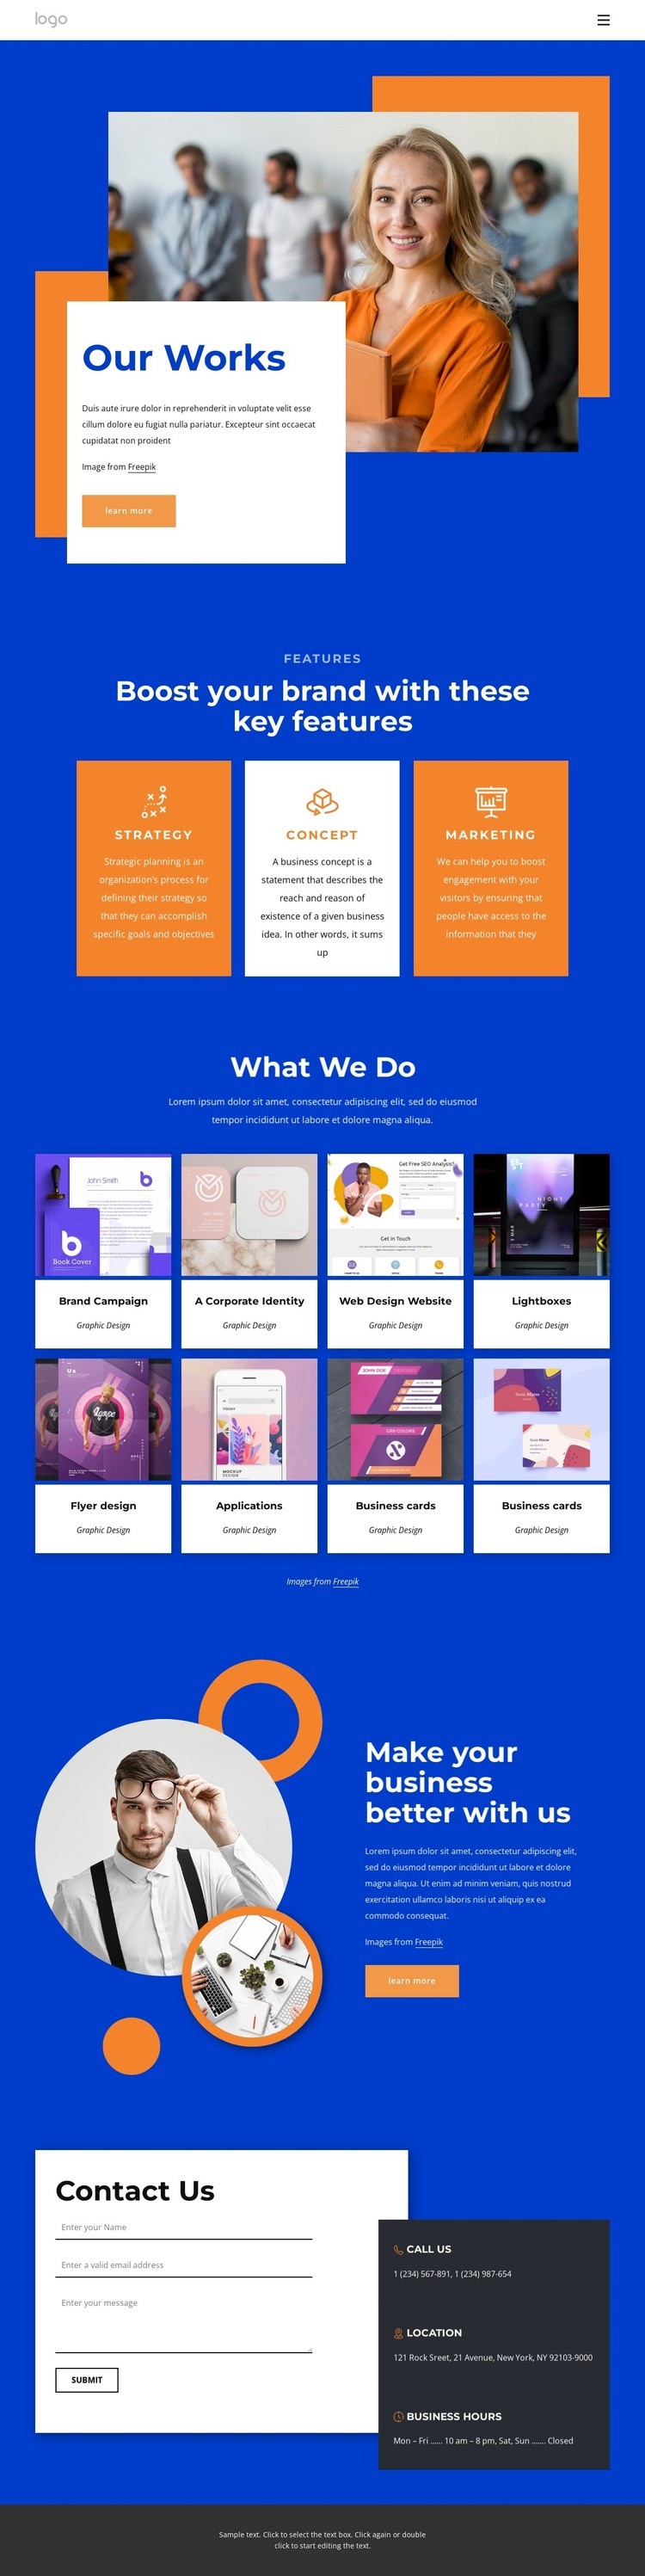 Web design for your small business Webflow Template Alternative